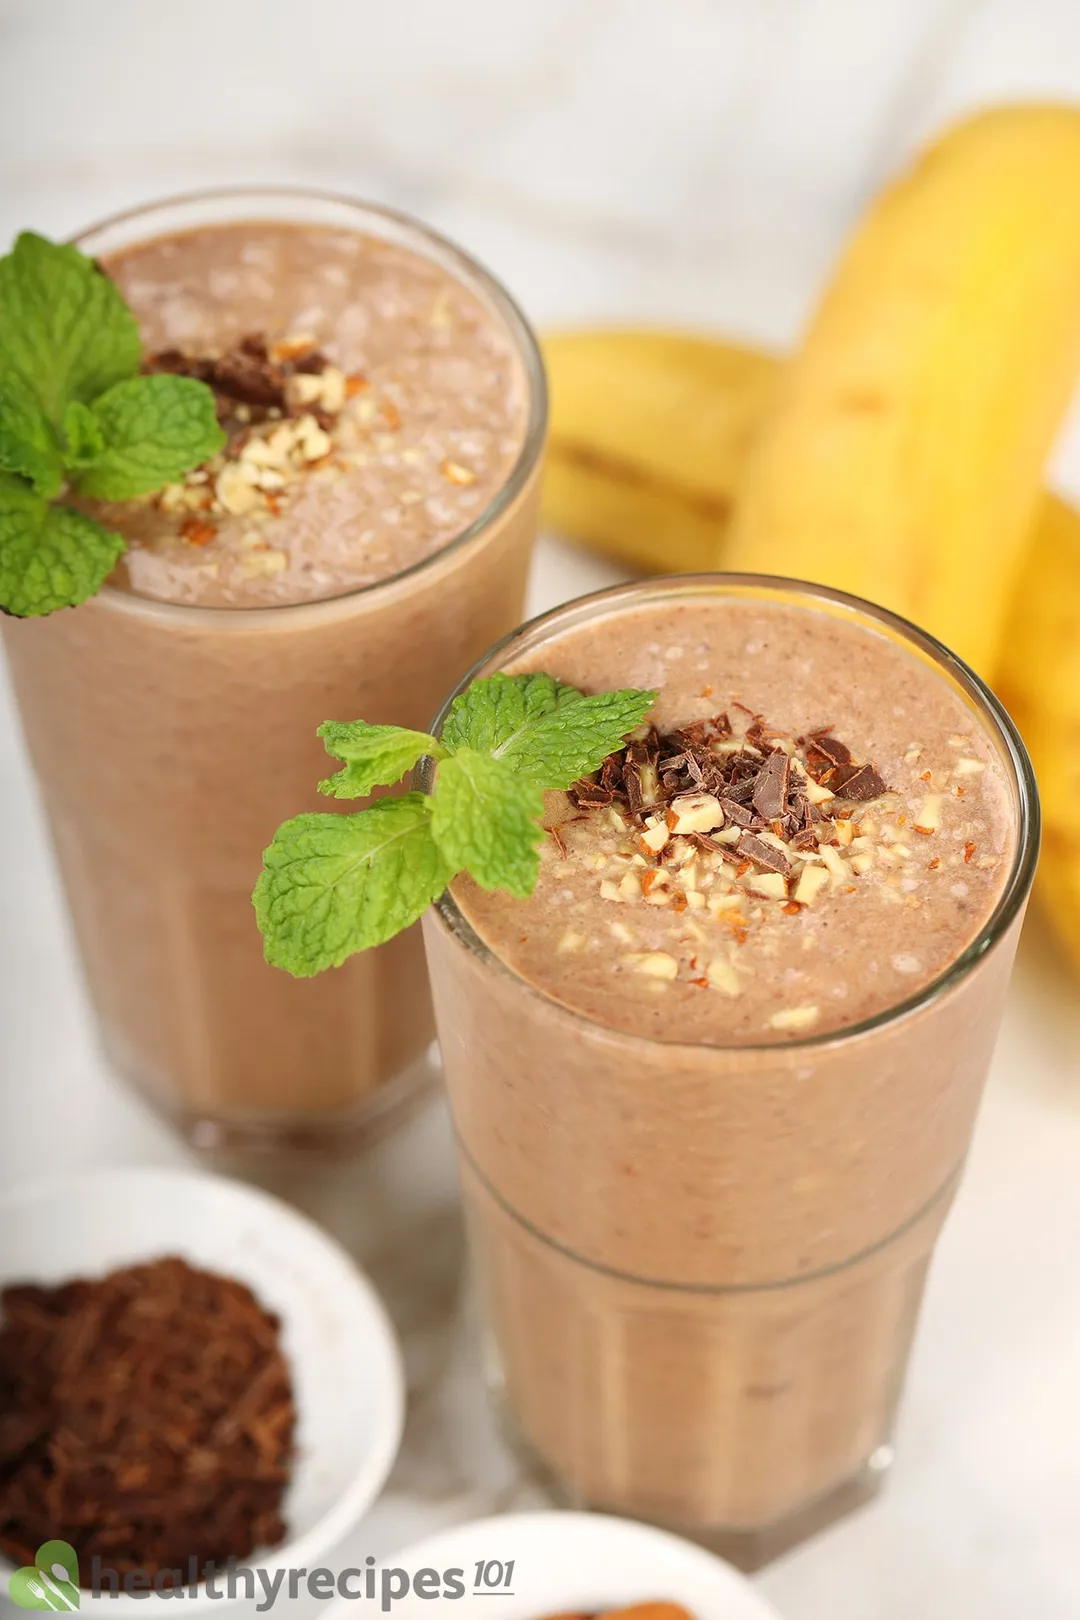 Two glasses of chocolate peanut butter banana smoothie placed near yellow unpeeled bananas and a small disk of minced chocolate.